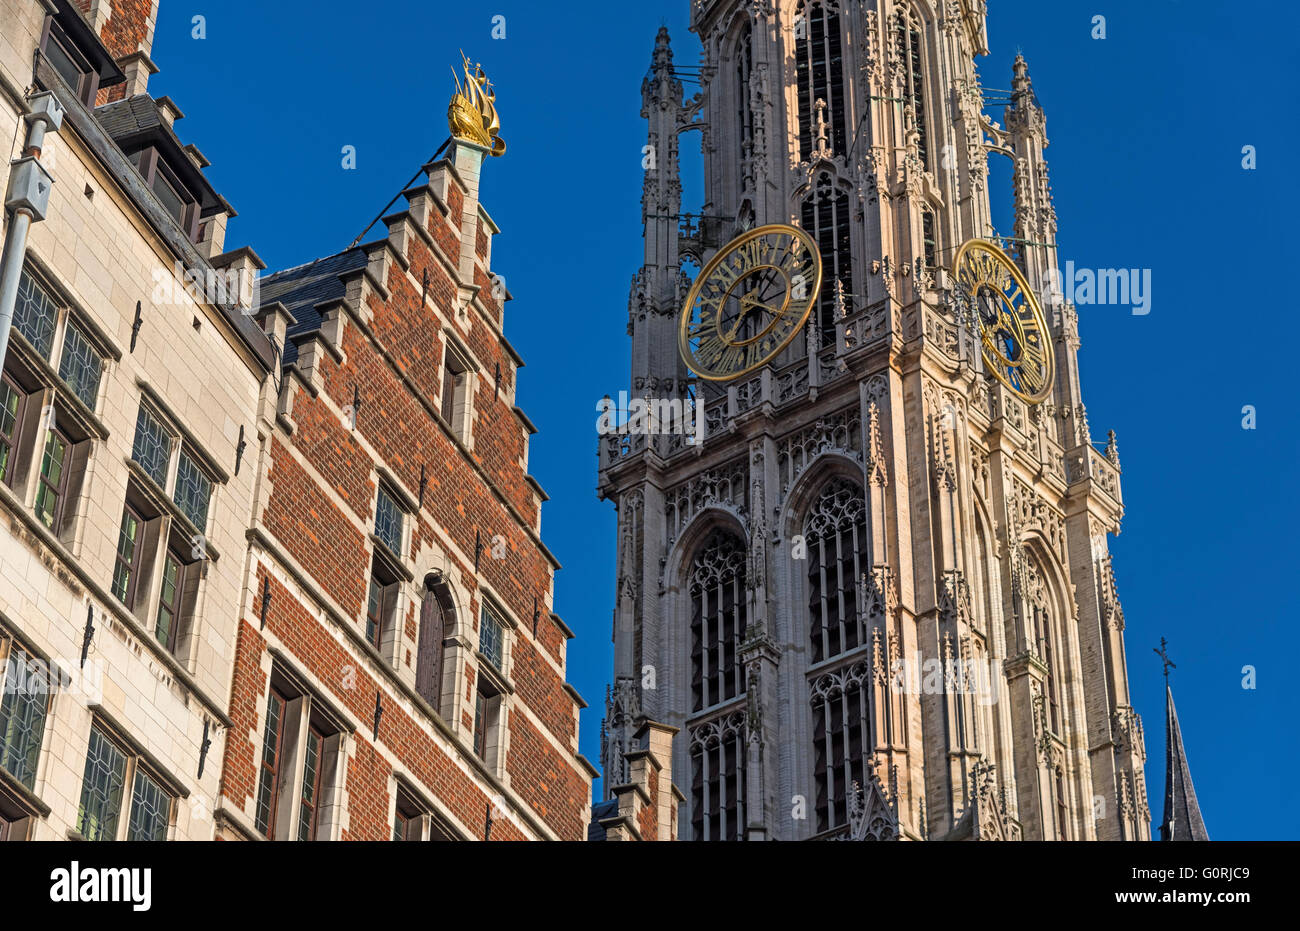 Cathedral spire and guildhouses Antwerp Belgium Stock Photo